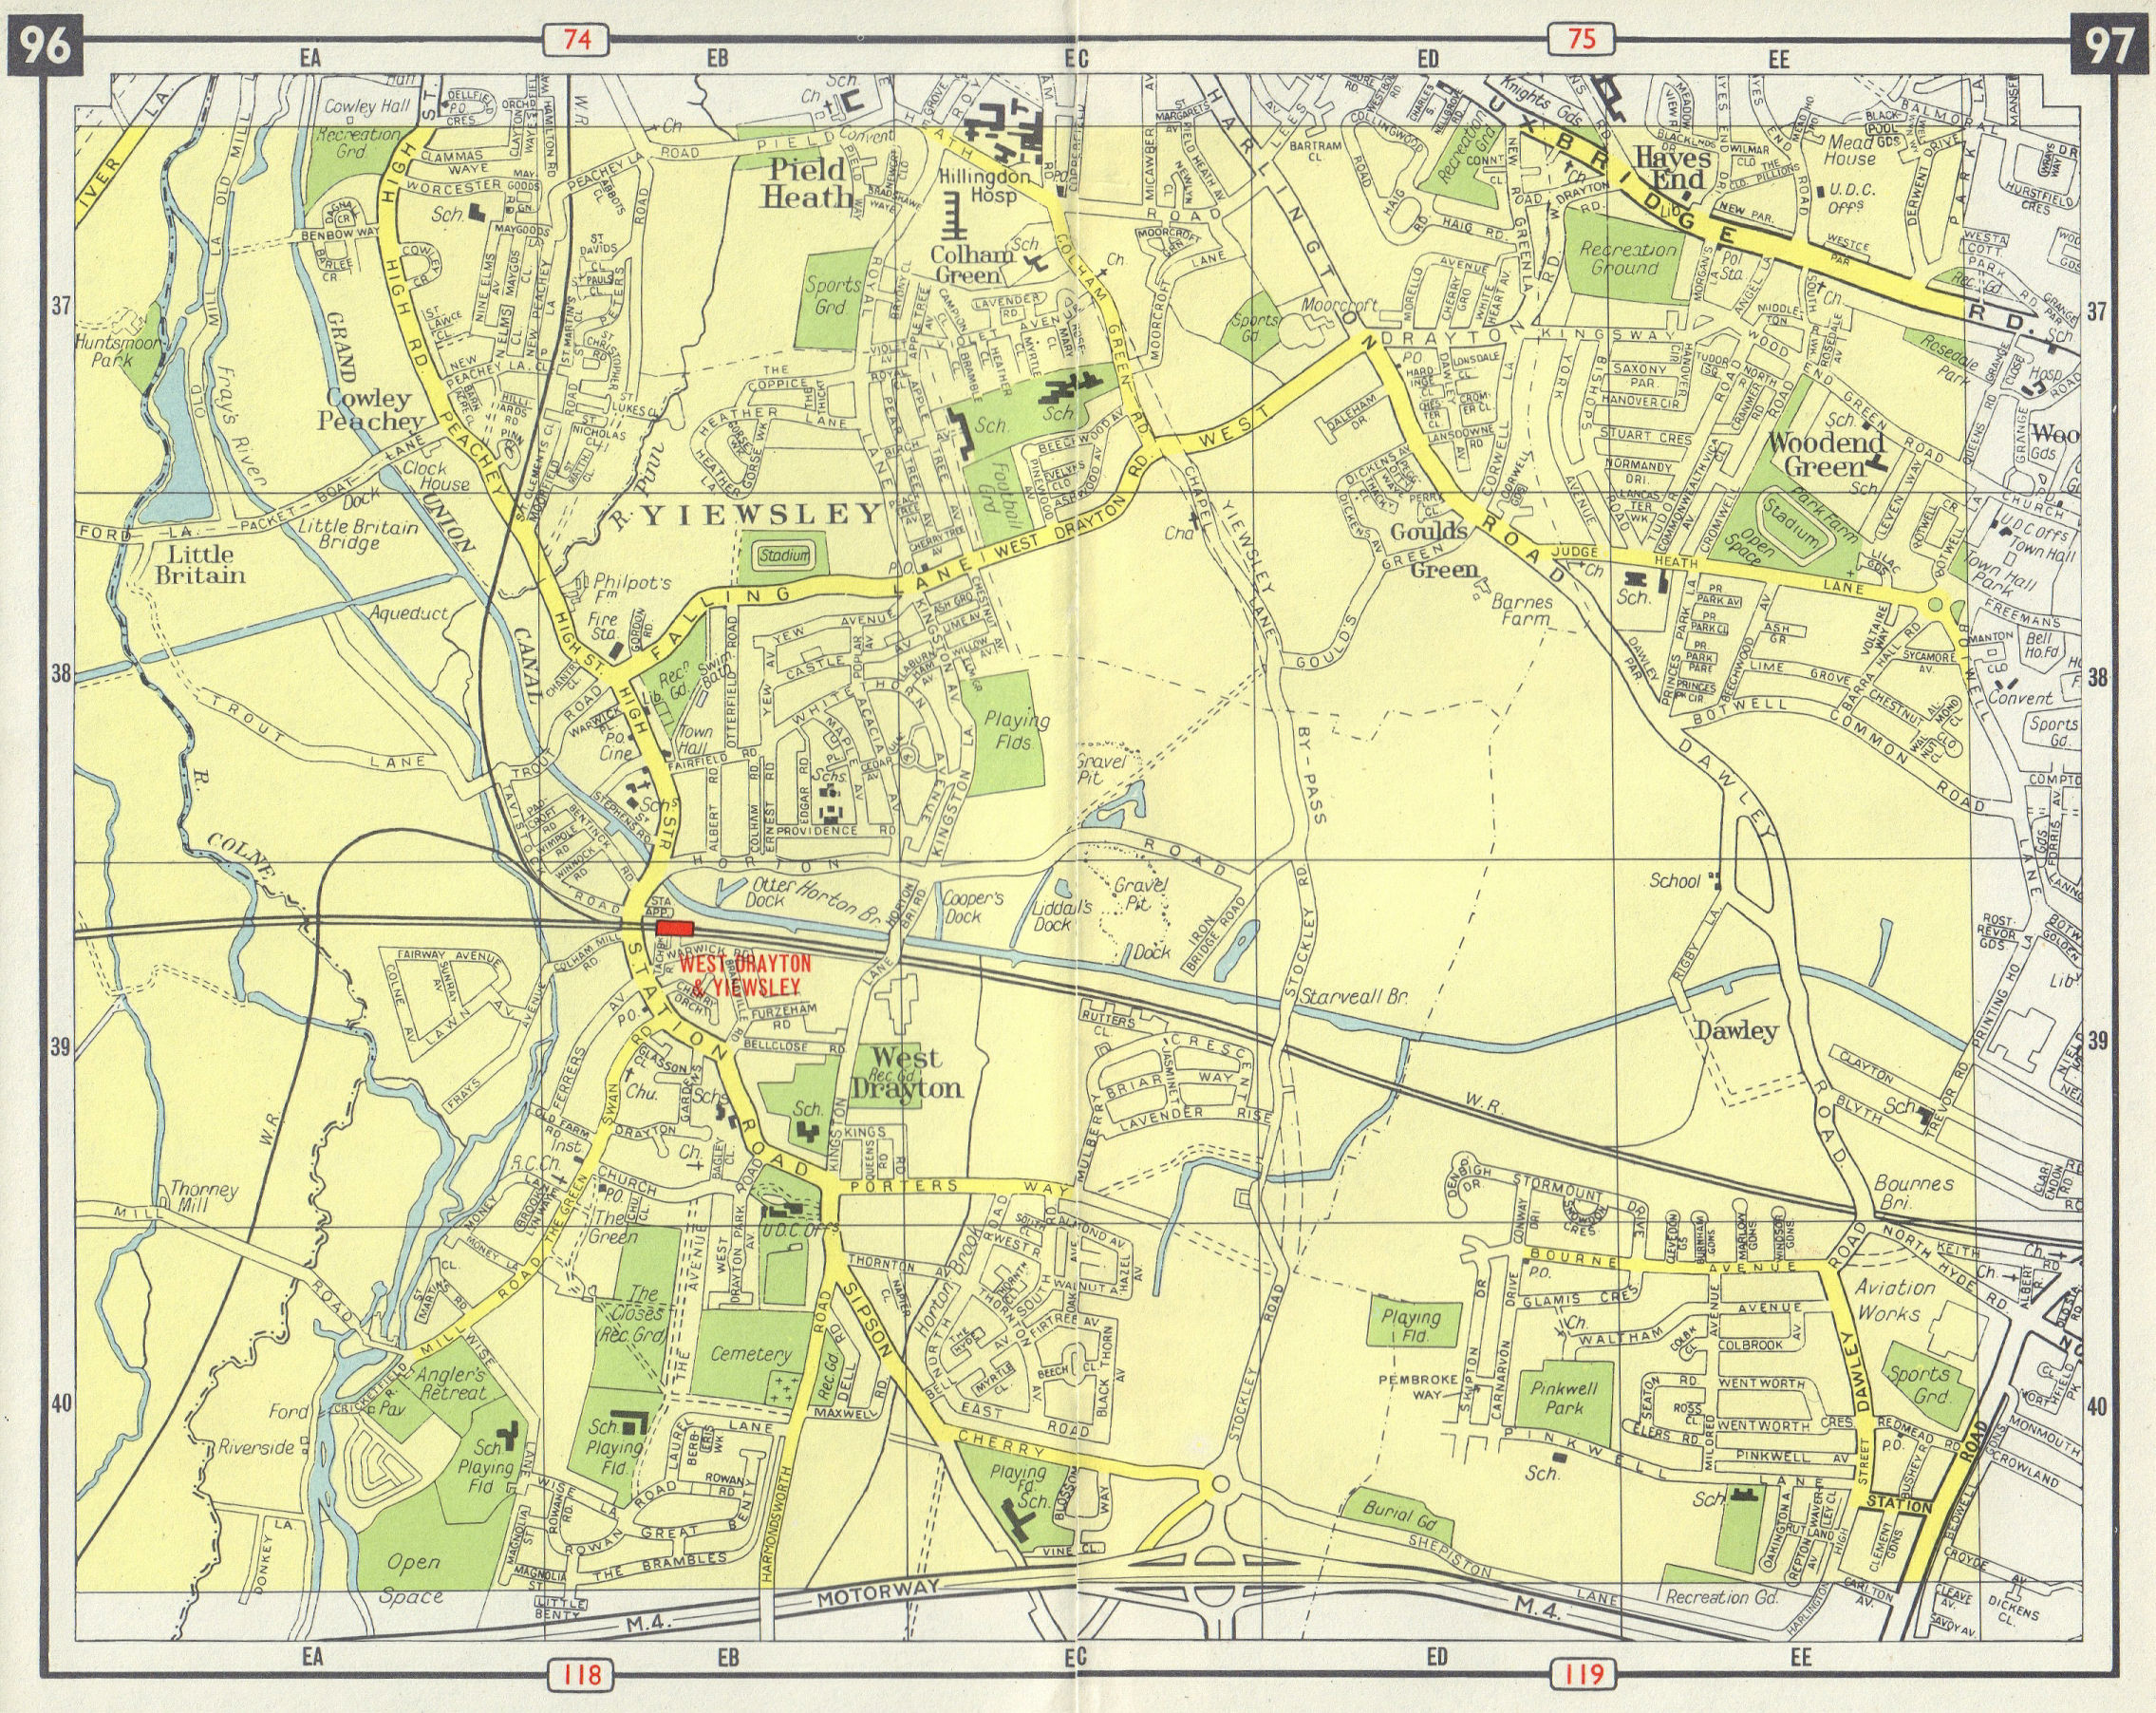 W LONDON West Drayton Yiewsley Hayes Pied Heath Woodend/Goulds Green 1965 map